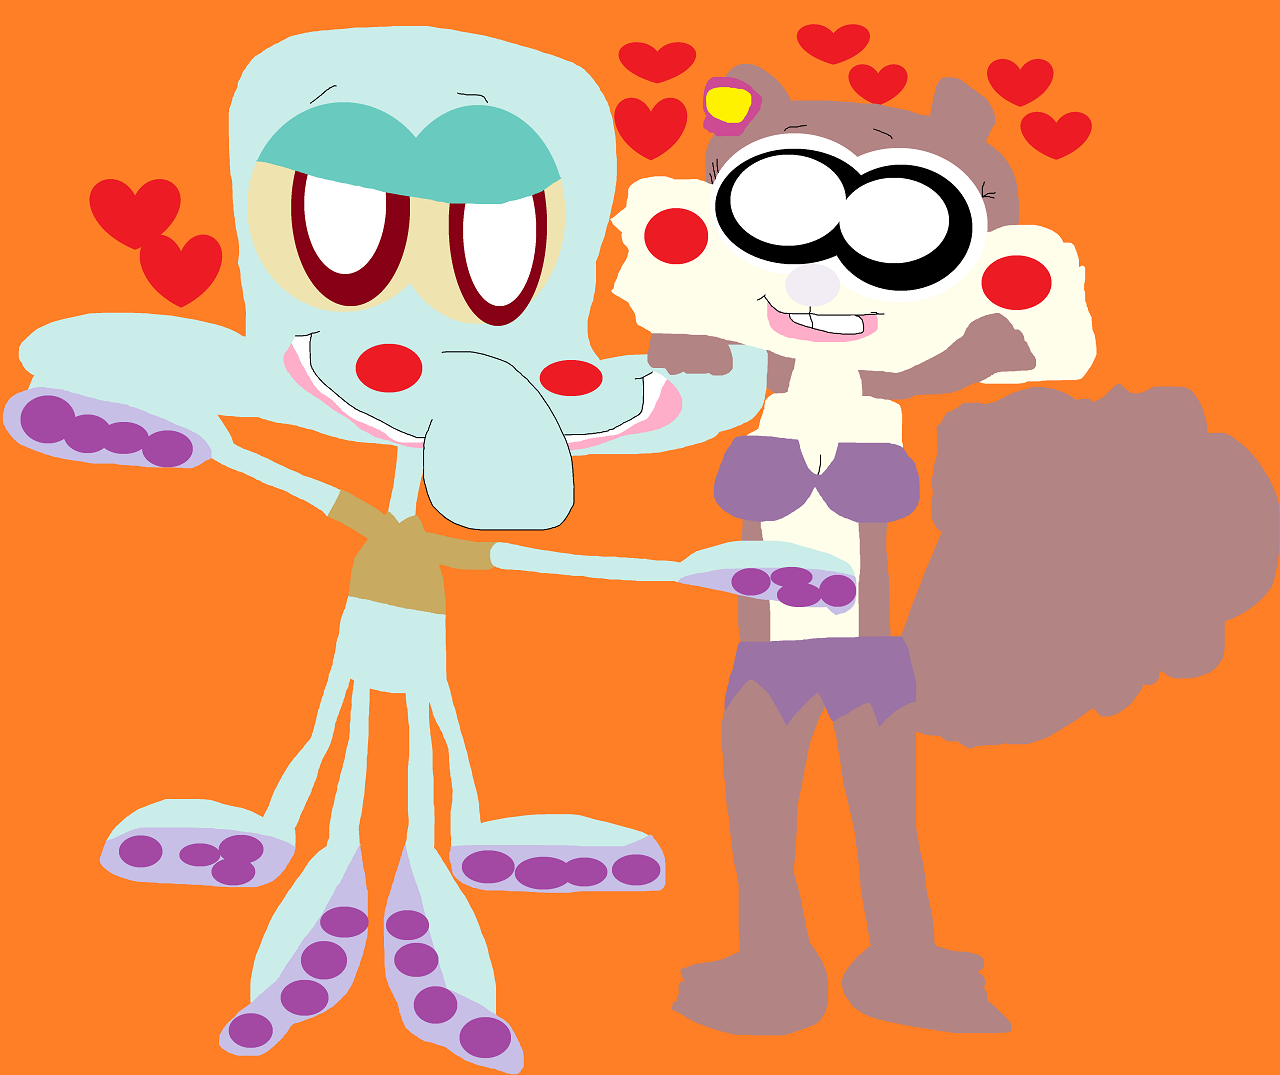 Just A Frisky Octopus And His Gal Again by Falconlobo